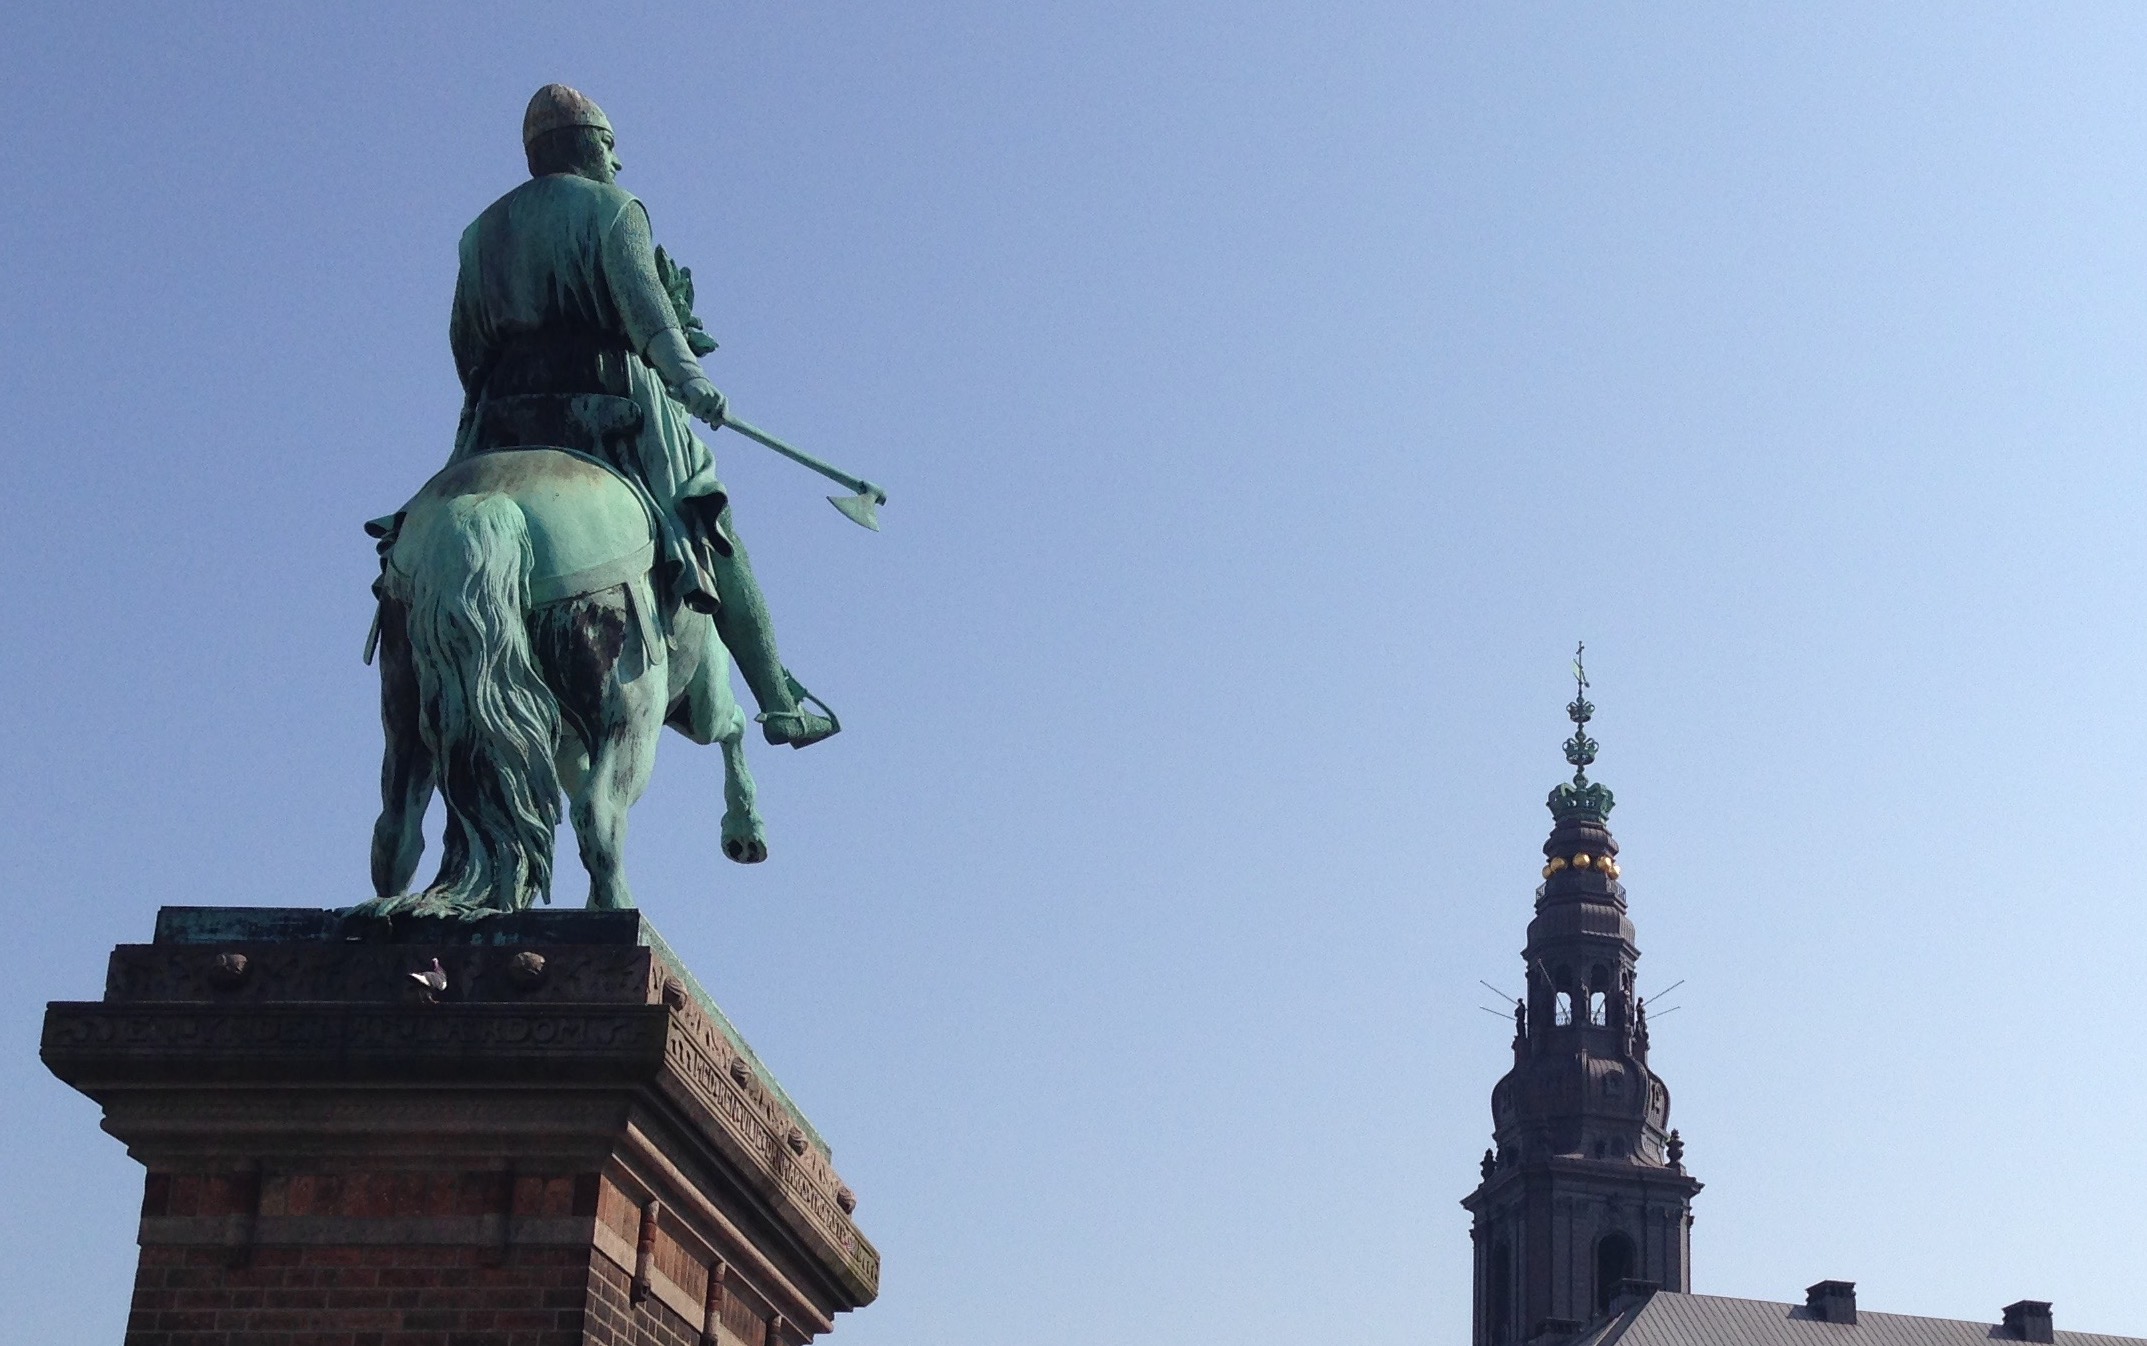 Photograph of a statue of a mounted, armored man holding an axe, and looking at a steeple in the near distance.